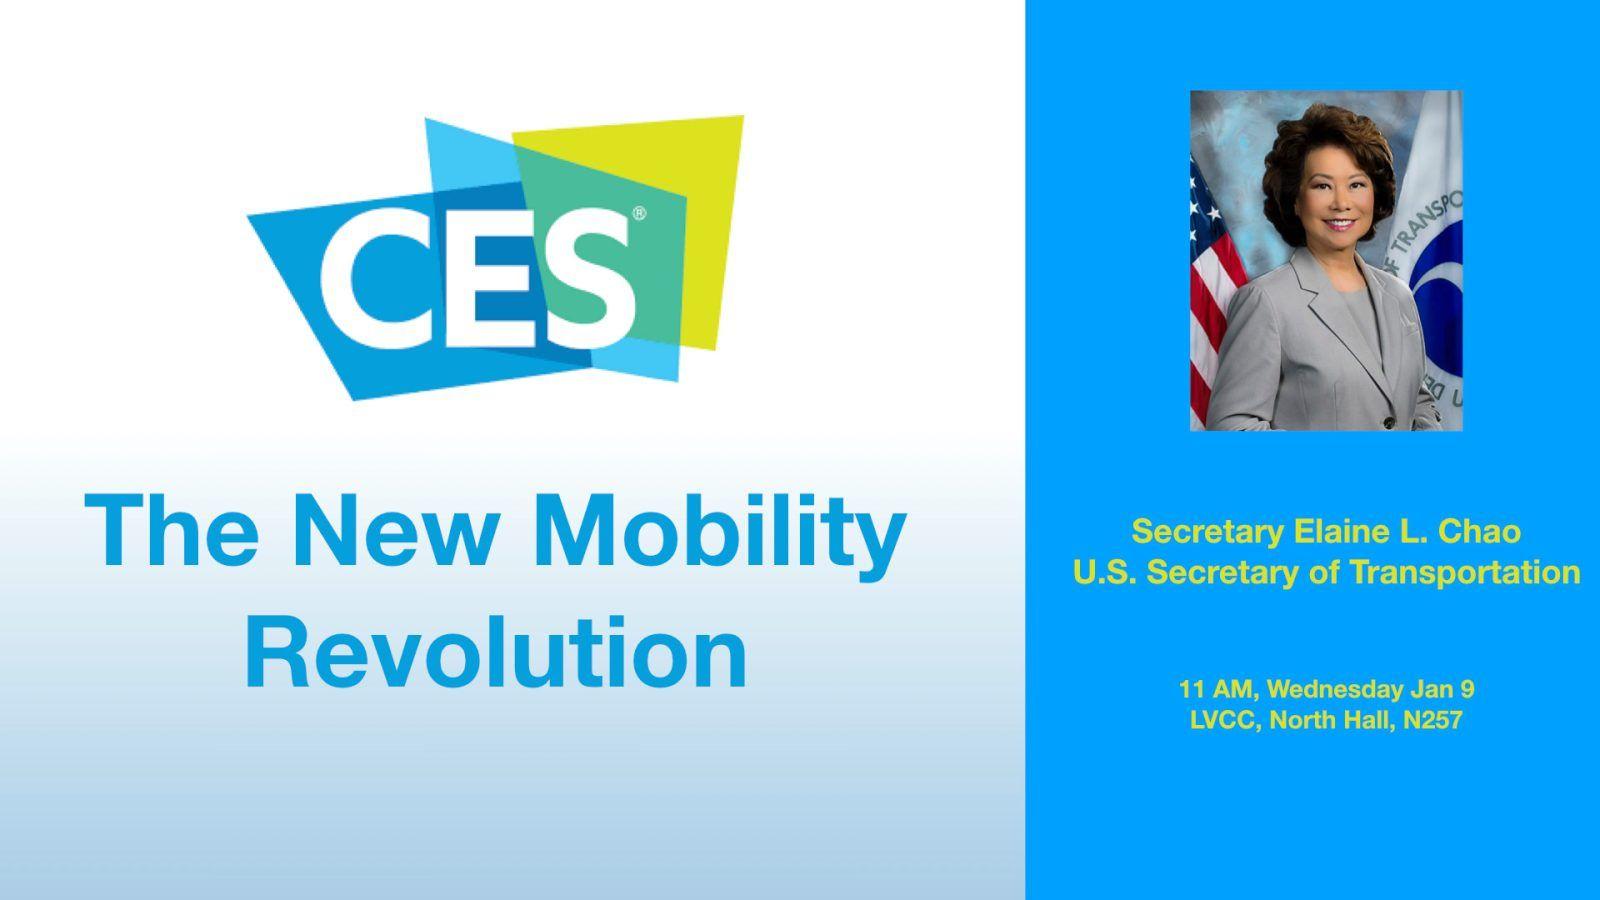 U.S. Sec. Chao to deliver CES 2019 Keynote